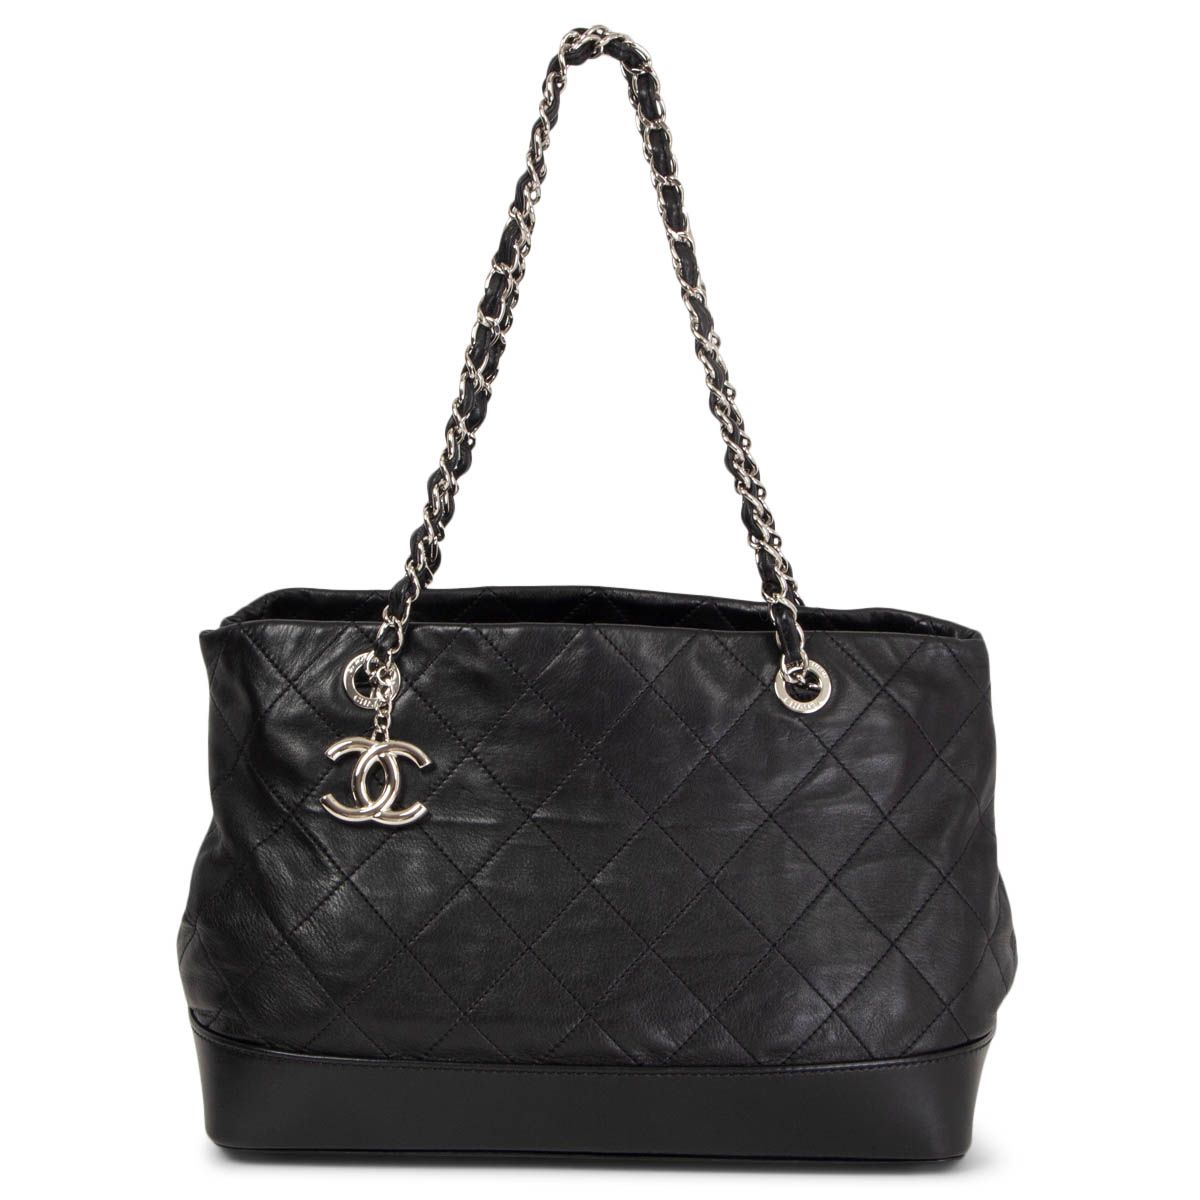 Elasno - FOR SALE!!!! CHANEL VIP BAGS